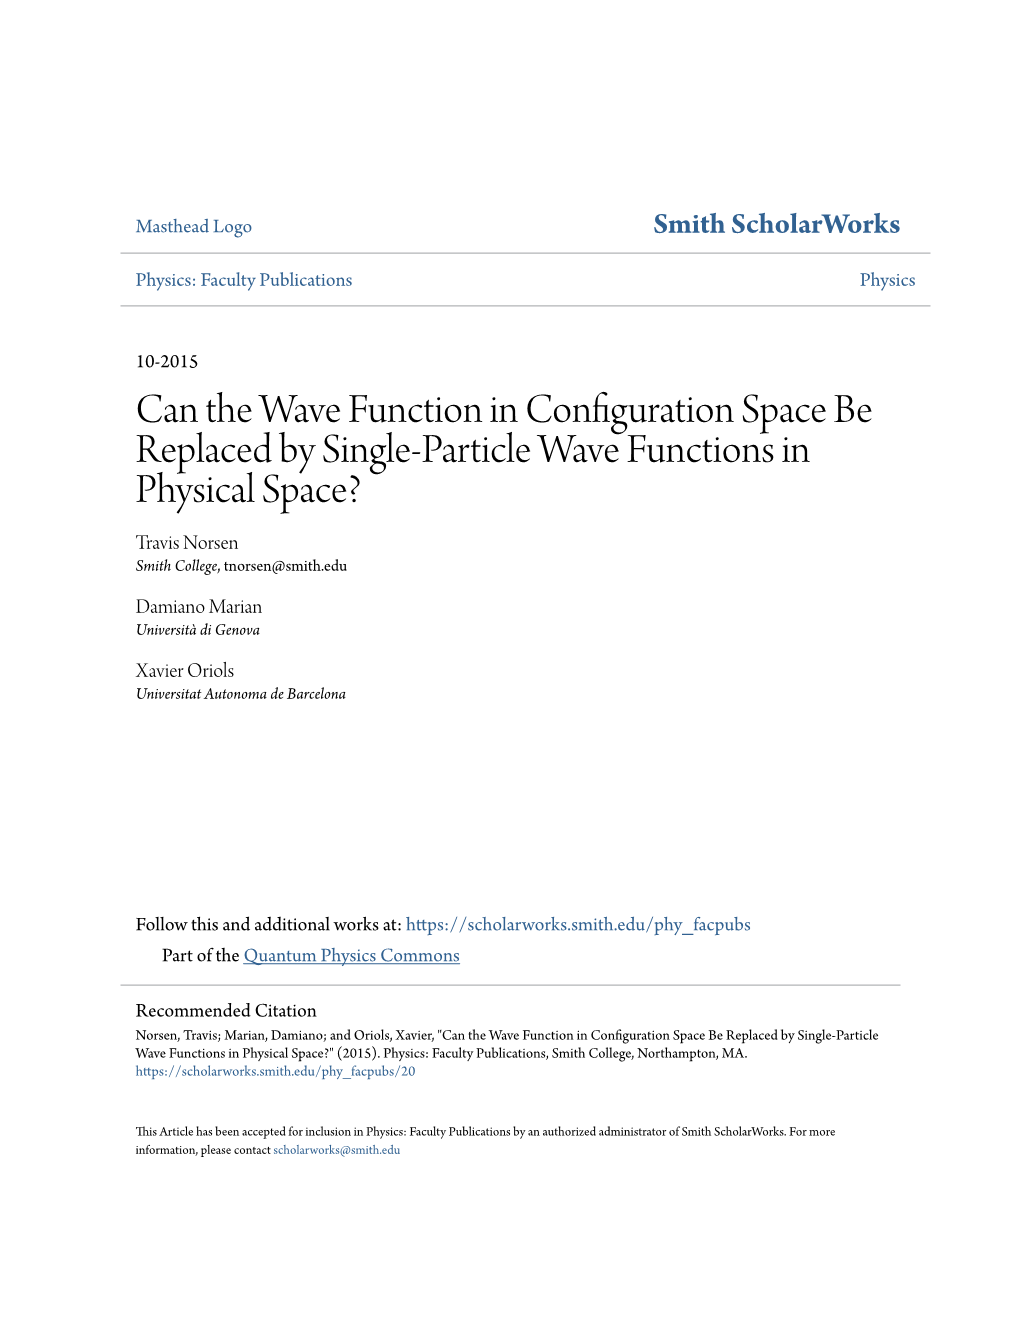 Can the Wave Function in Configuration Space Be Replaced by Single-Particle Wave Functions in Physical Space? Travis Norsen Smith College, Tnorsen@Smith.Edu